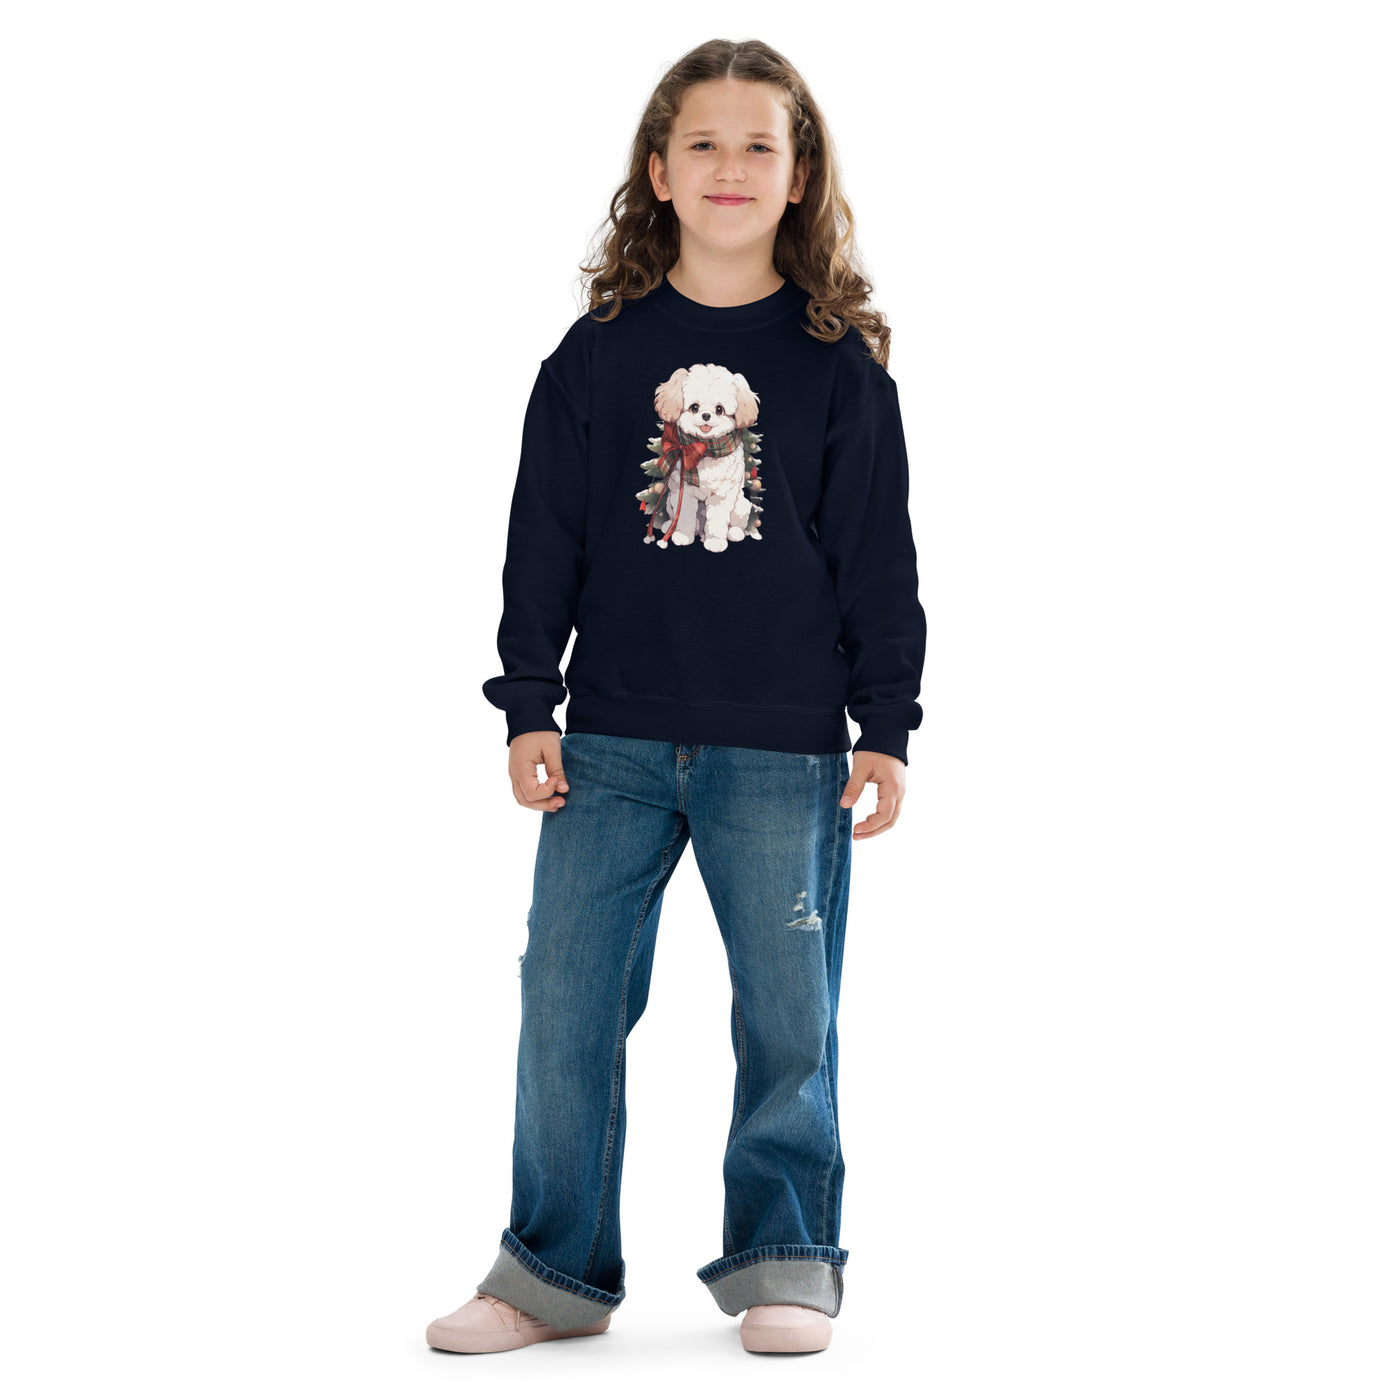 Dog Youth crewneck sweatshirt XS-XL Unisex - Coco Potato - dresses and partywear for little girls